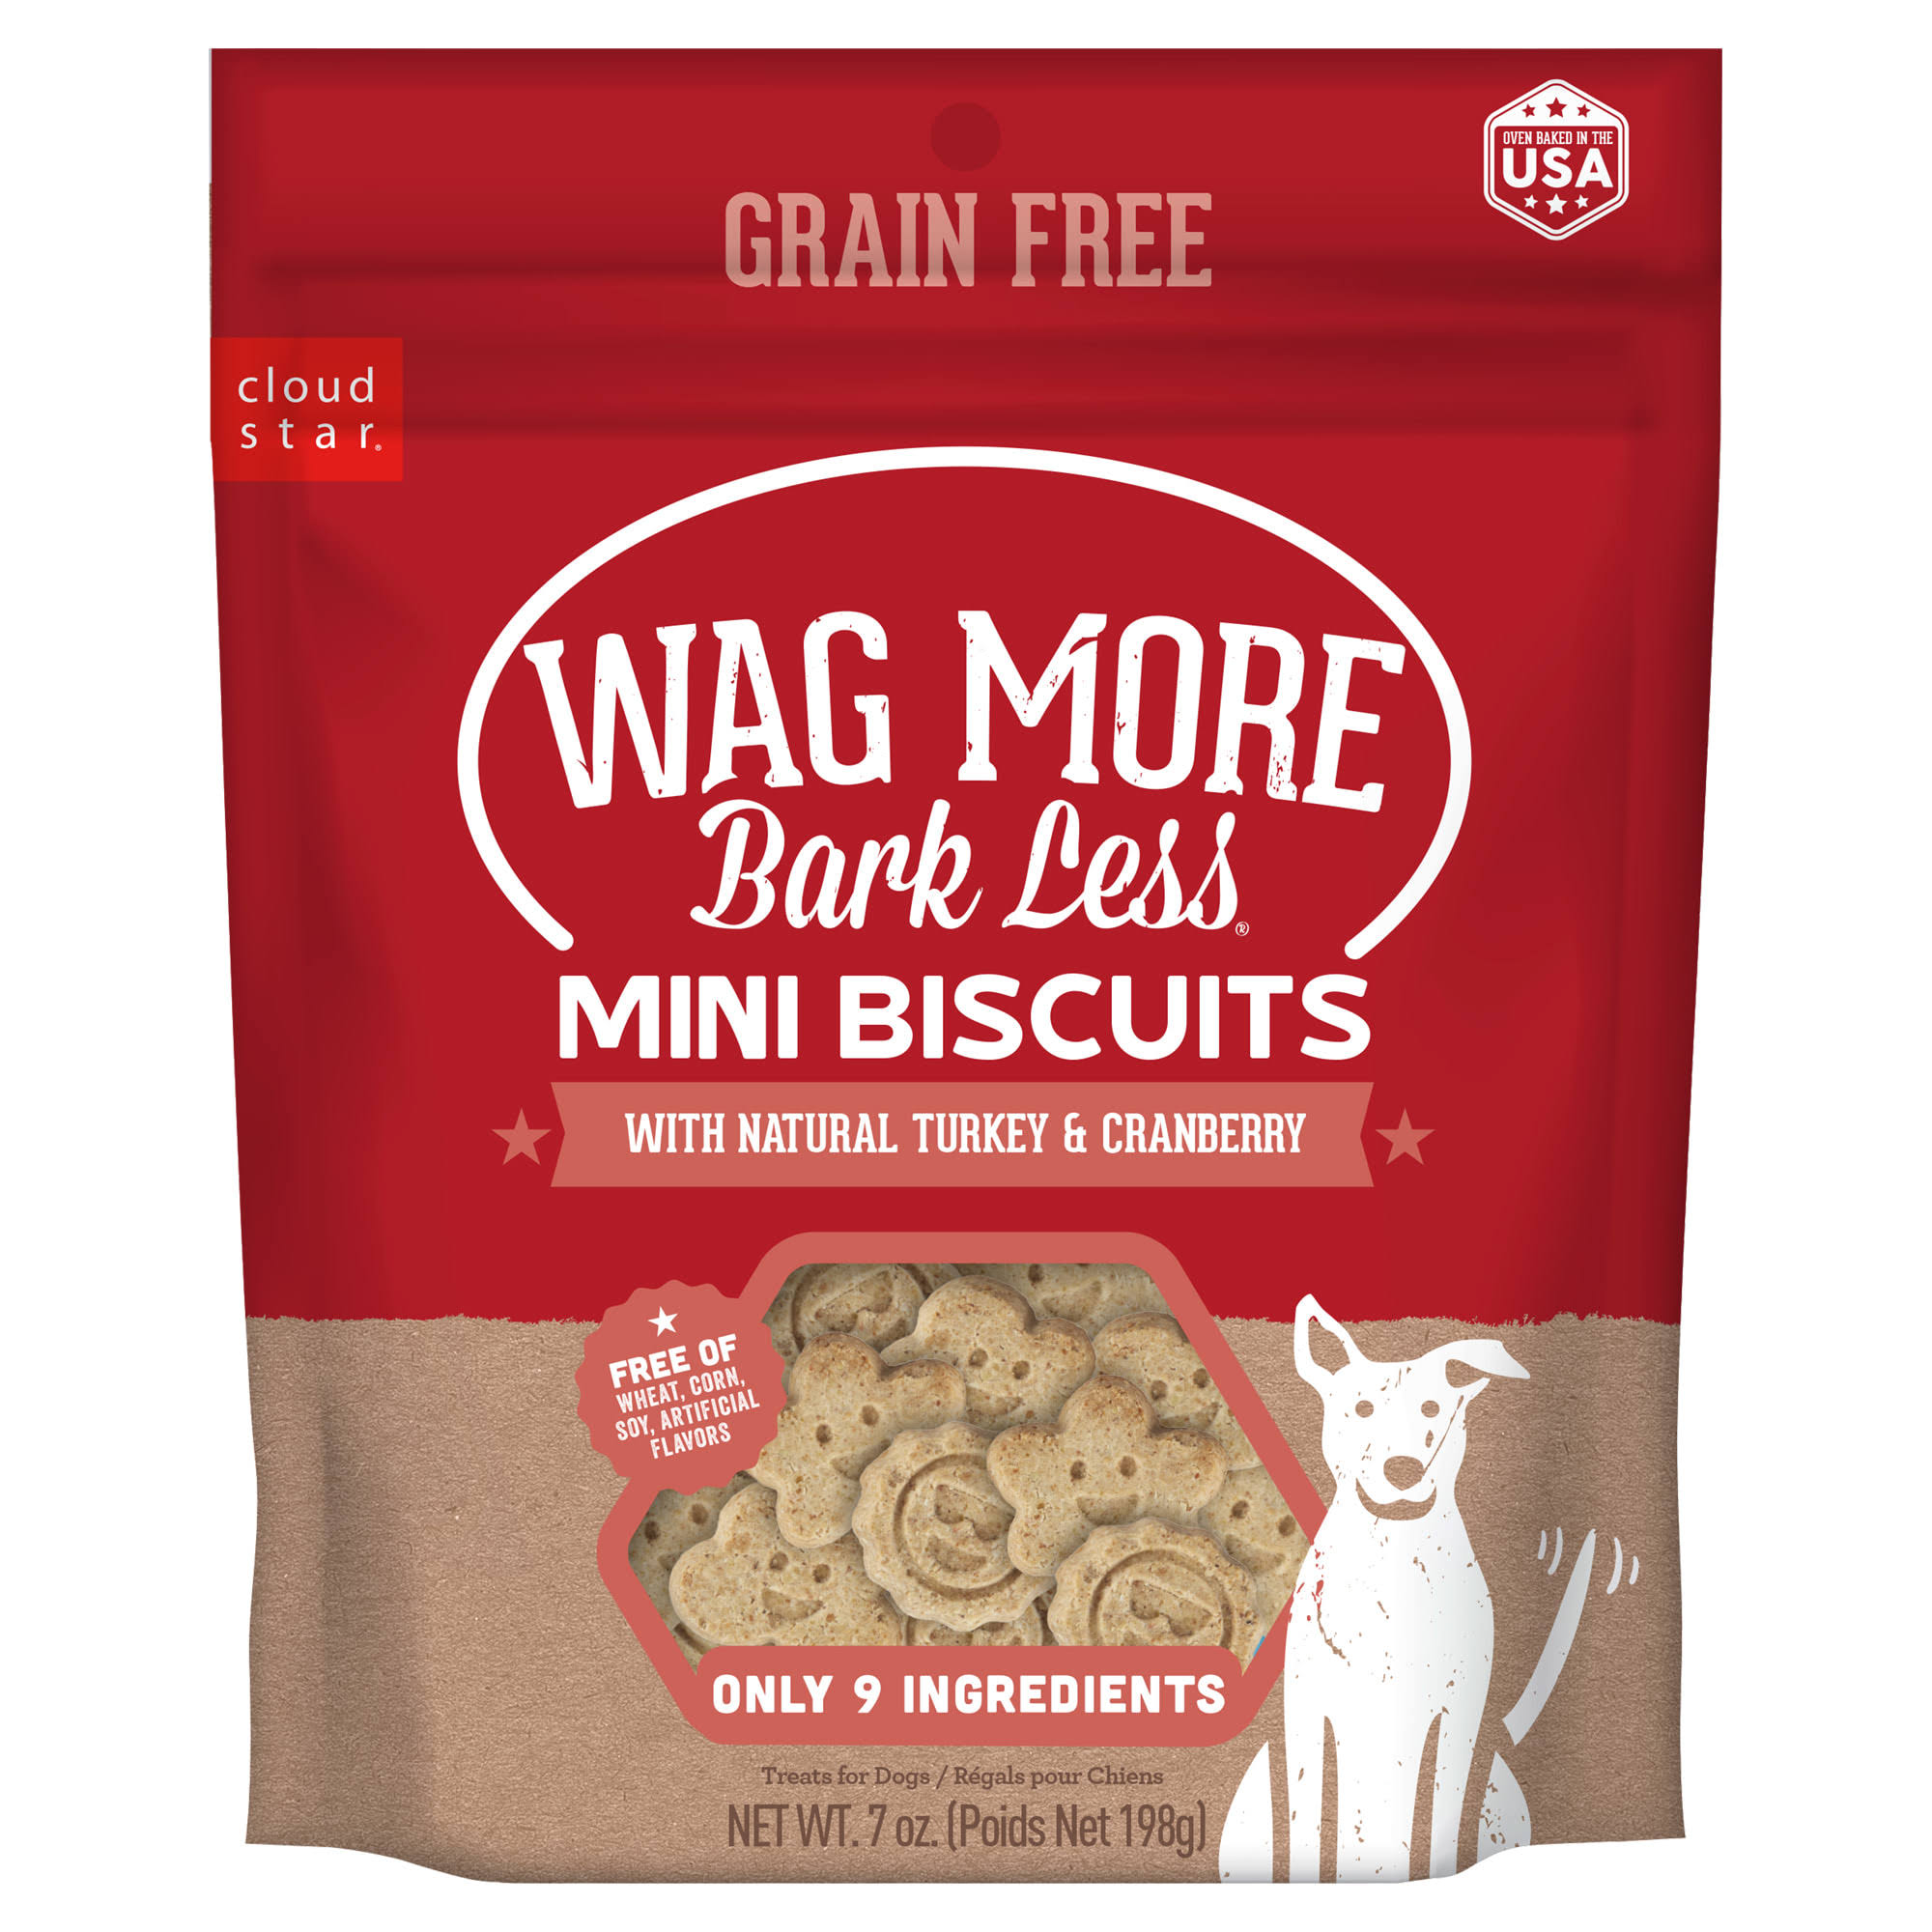 Cloud Star Wag More Bark Less Grain-Free Oven-Baked Mini Dog Biscuits - Turkey & Cranberry - 7 oz. Bag